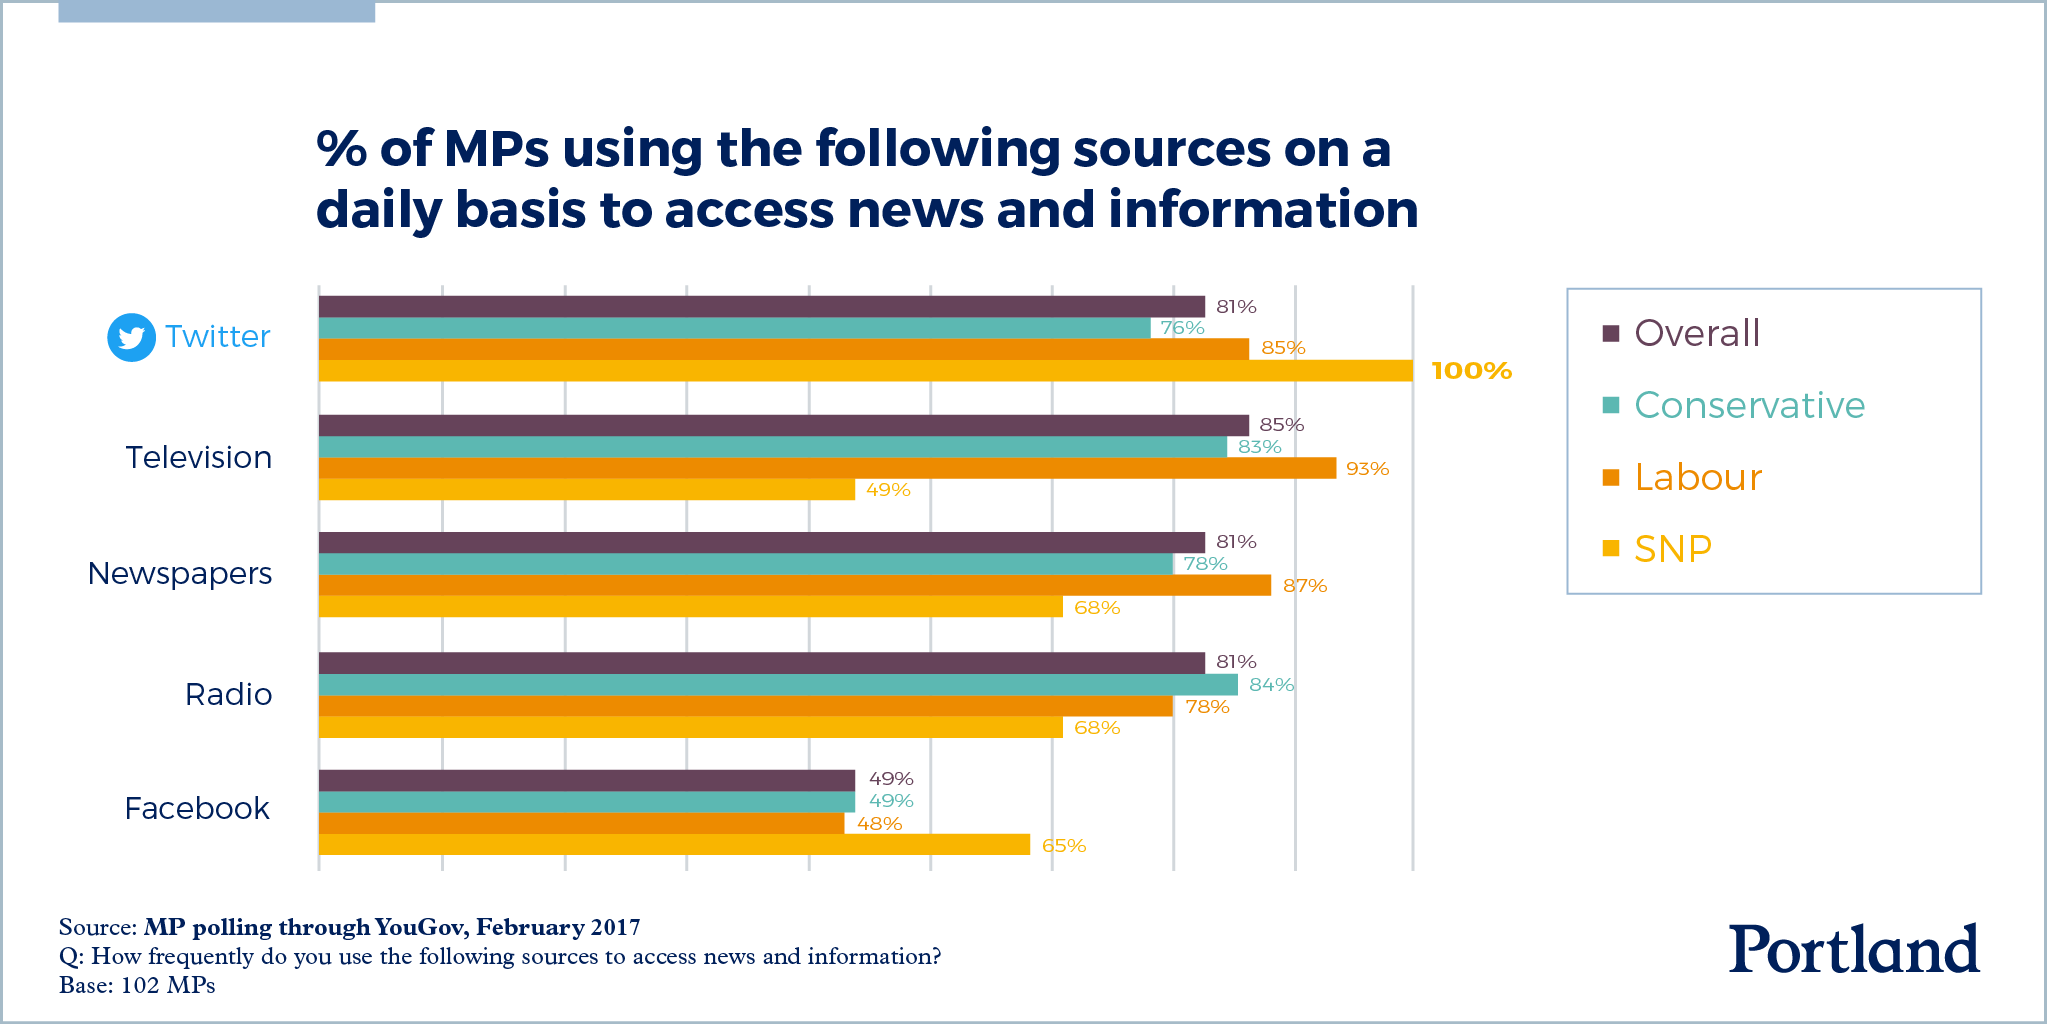 % of MPS using the following sources on a daily basis to access news and information